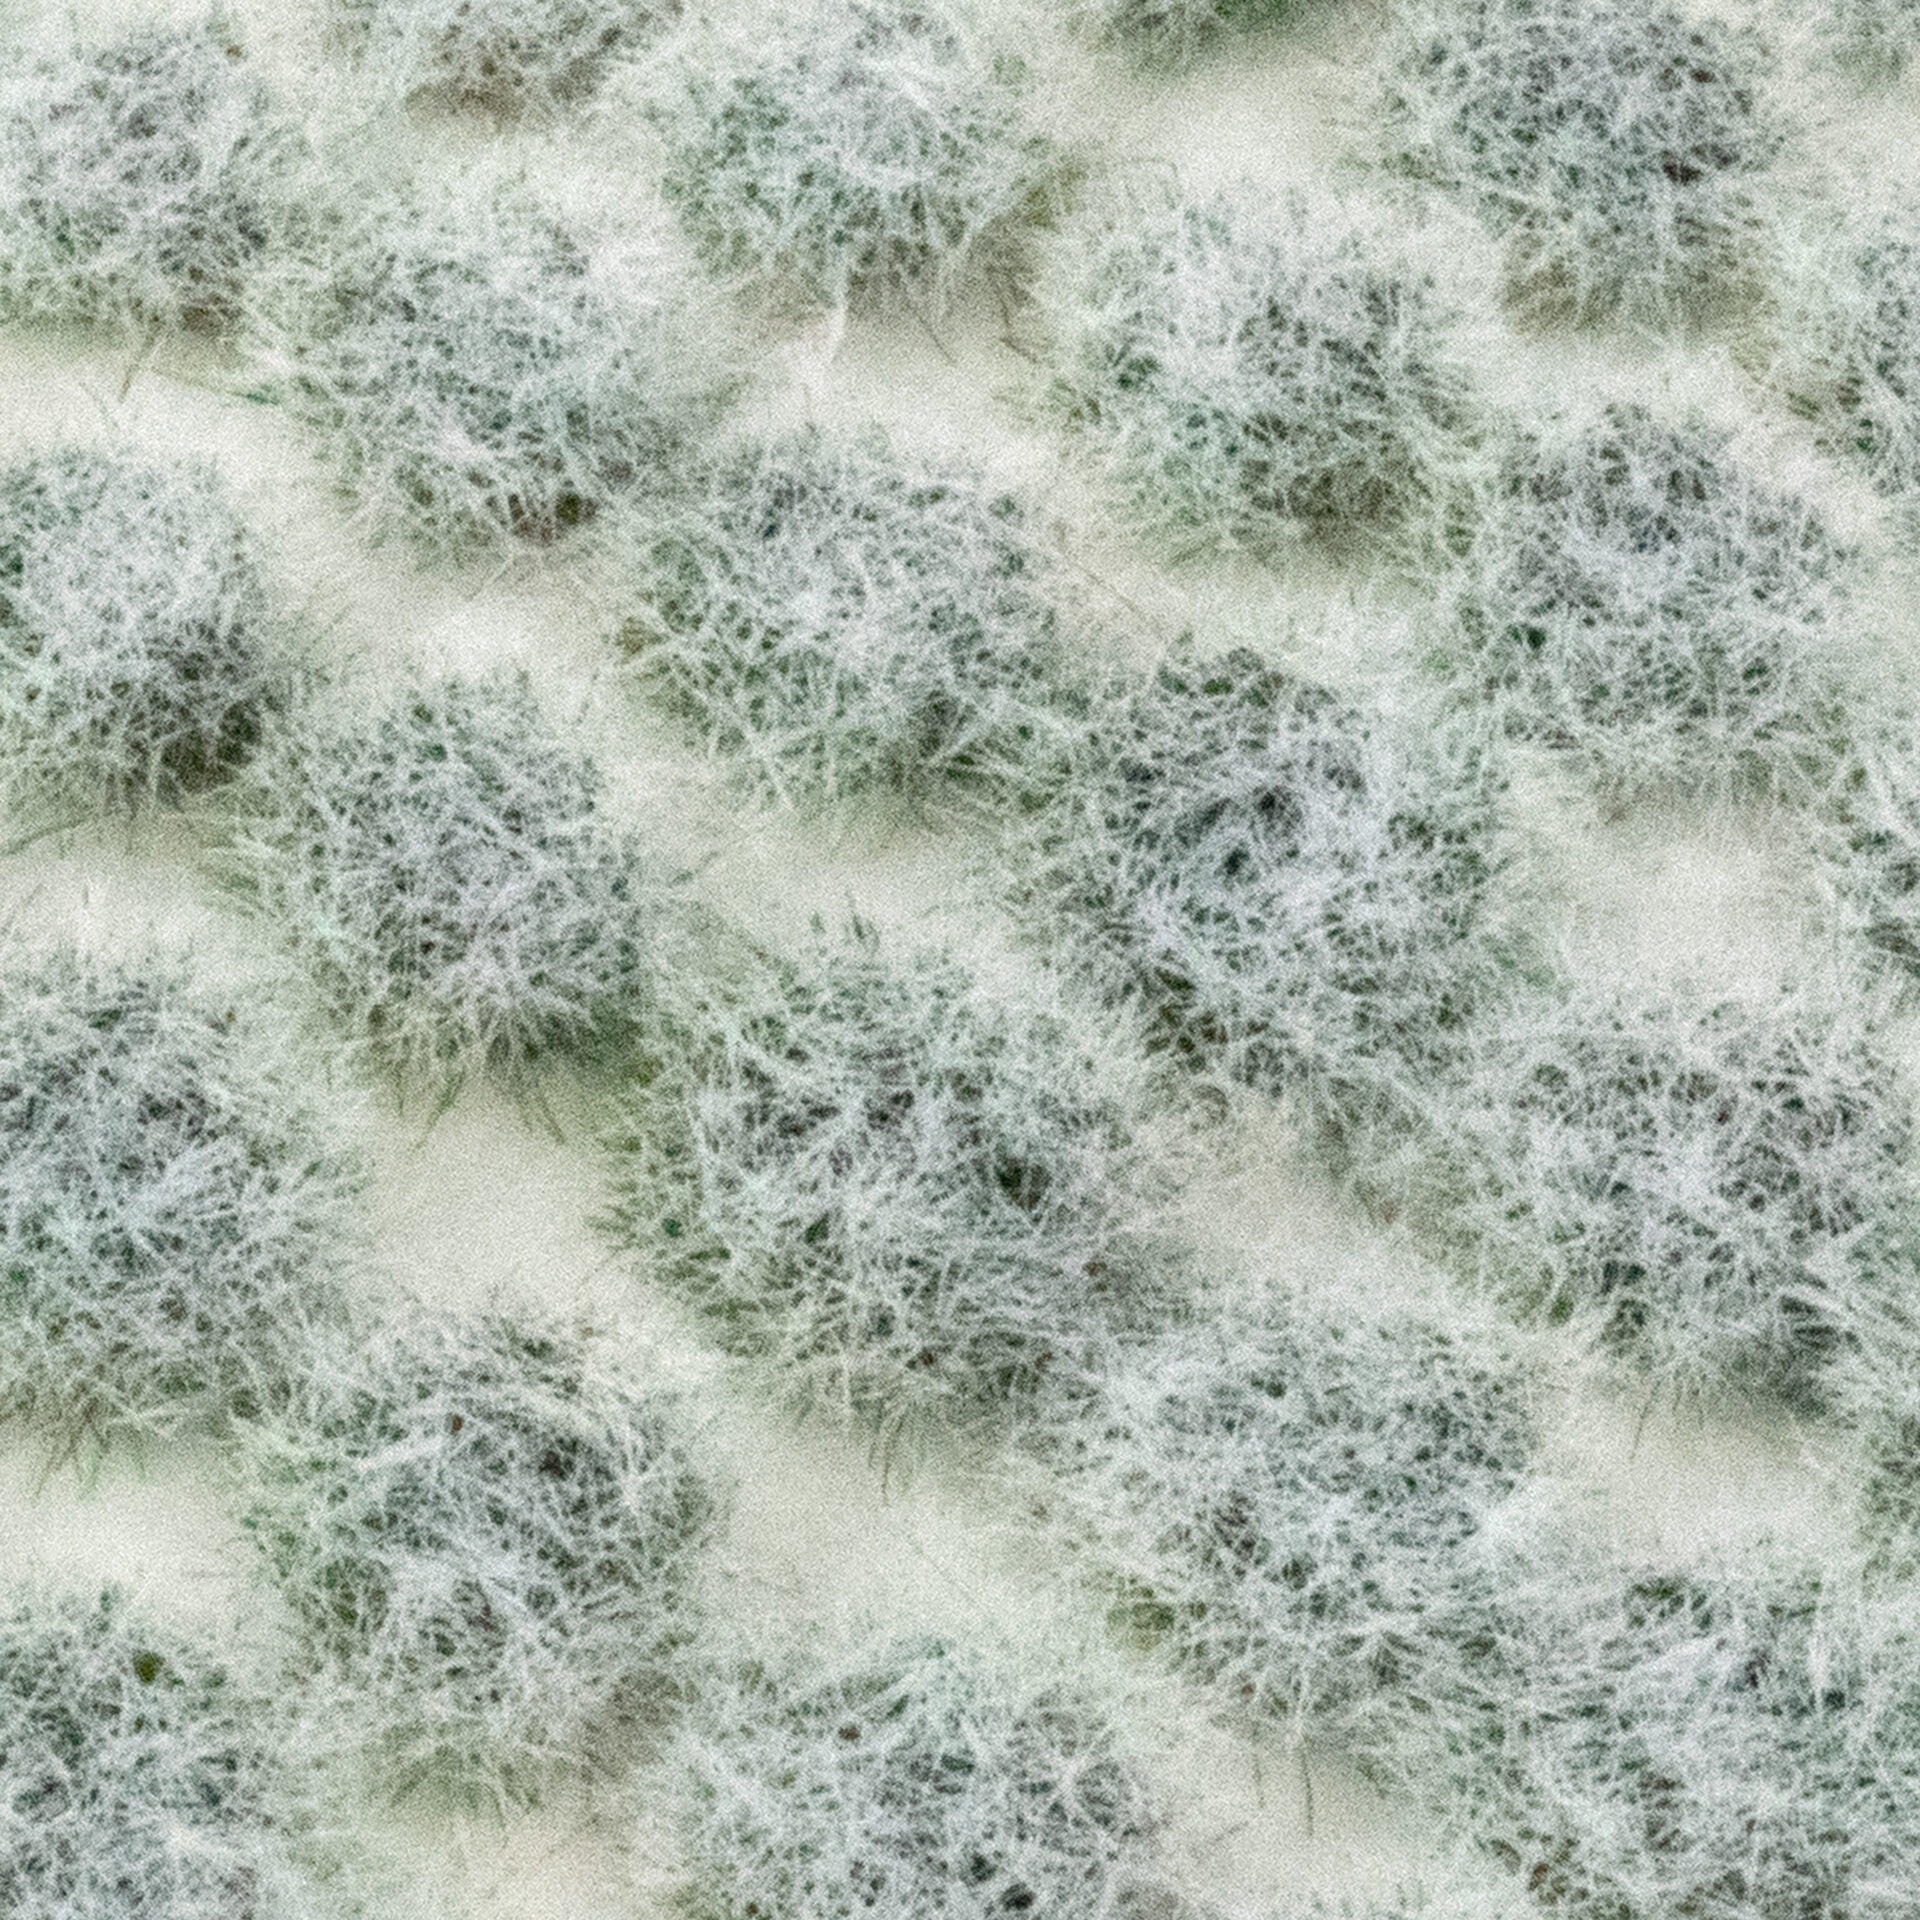 Iced Winter 4mm Static Grass Tufts 3